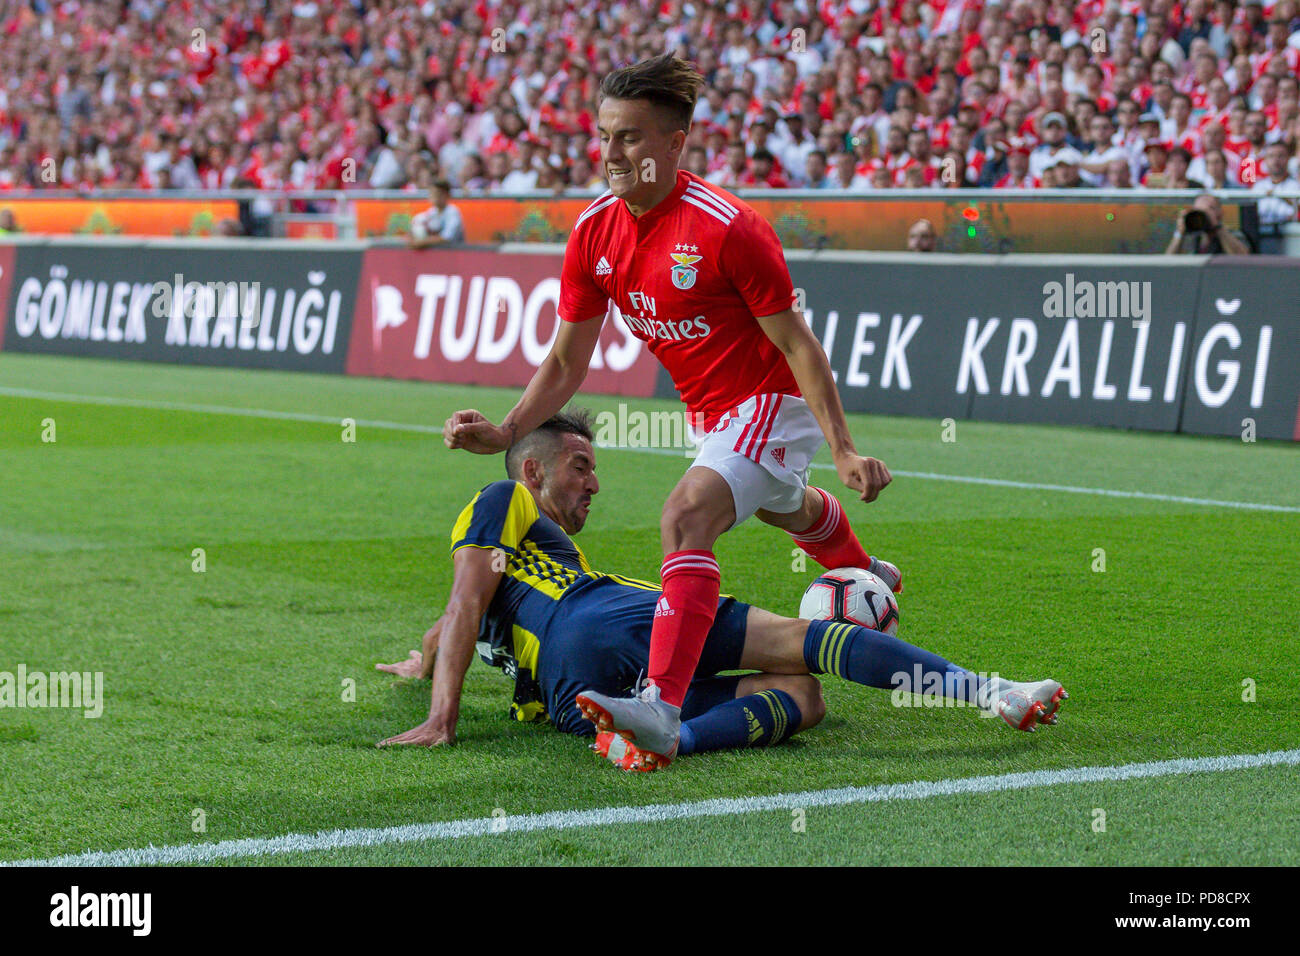 Lisbon, Portugal. August 07, 2018. Lisbon, Portugal. Benfica's forward from Argentina Franco Cervi (11) and Fenerbahce's defender from Chile Mauricio Isla (4) during the game of the 1st leg of the Third Qualifying Round of the UEFA Champions League, SL Benfica vs Fenerbahce SK © Alexandre de Sousa/Alamy Live News Stock Photo